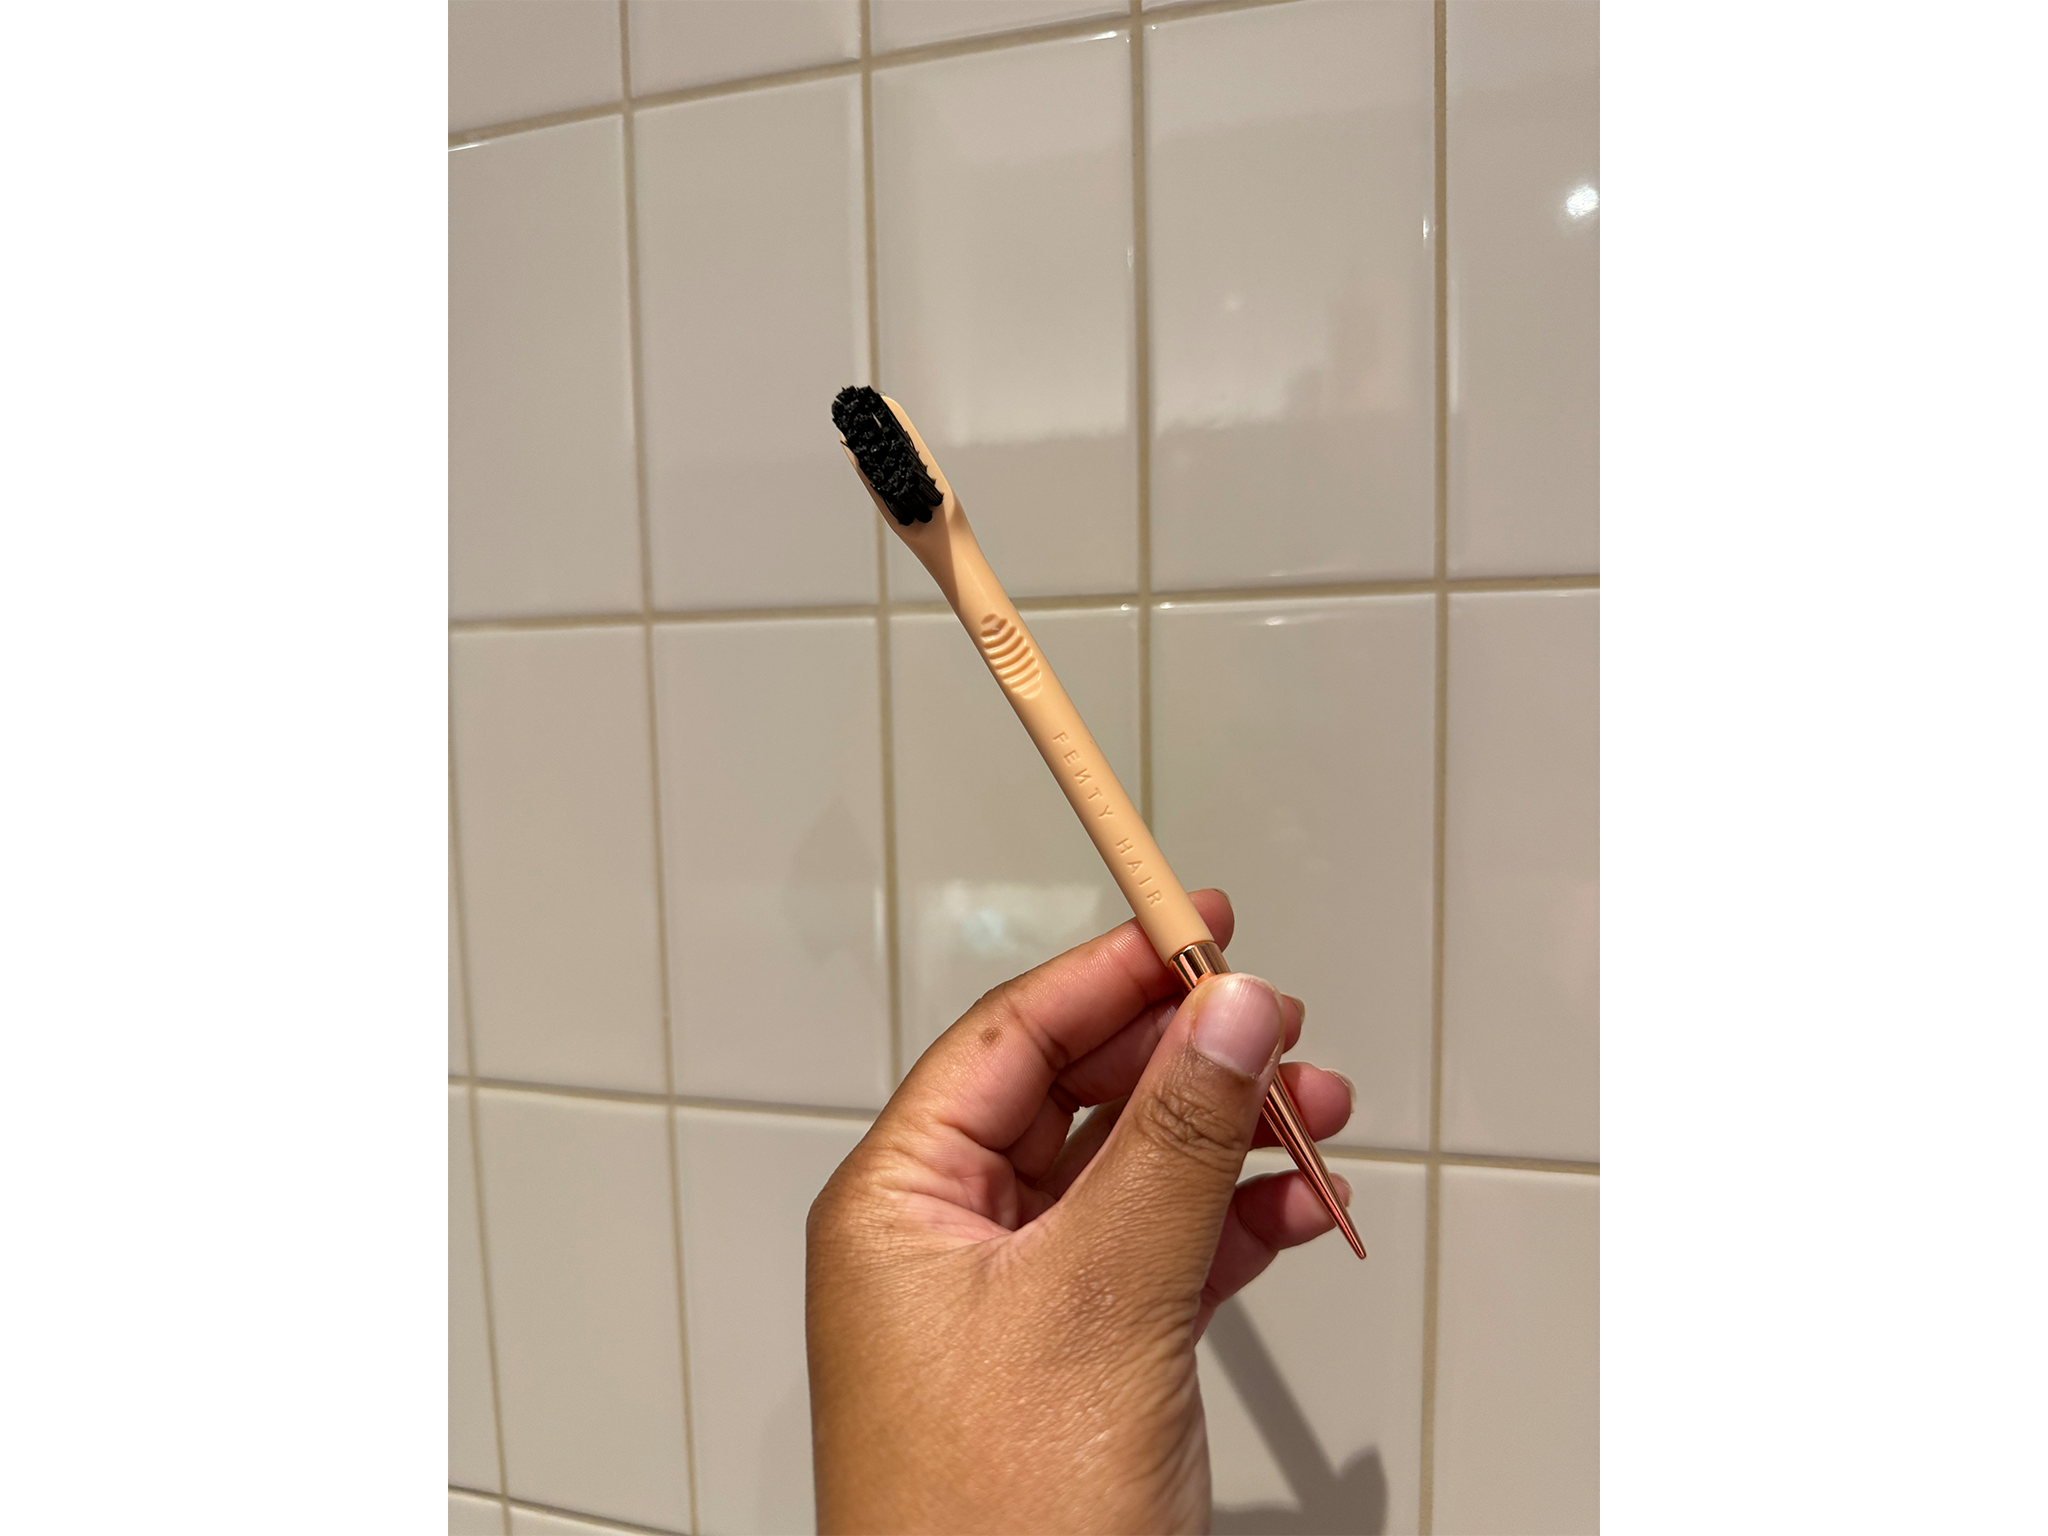 Fenty Hair indybest review Fenty Hair the side stick 3-in-1 edge tool